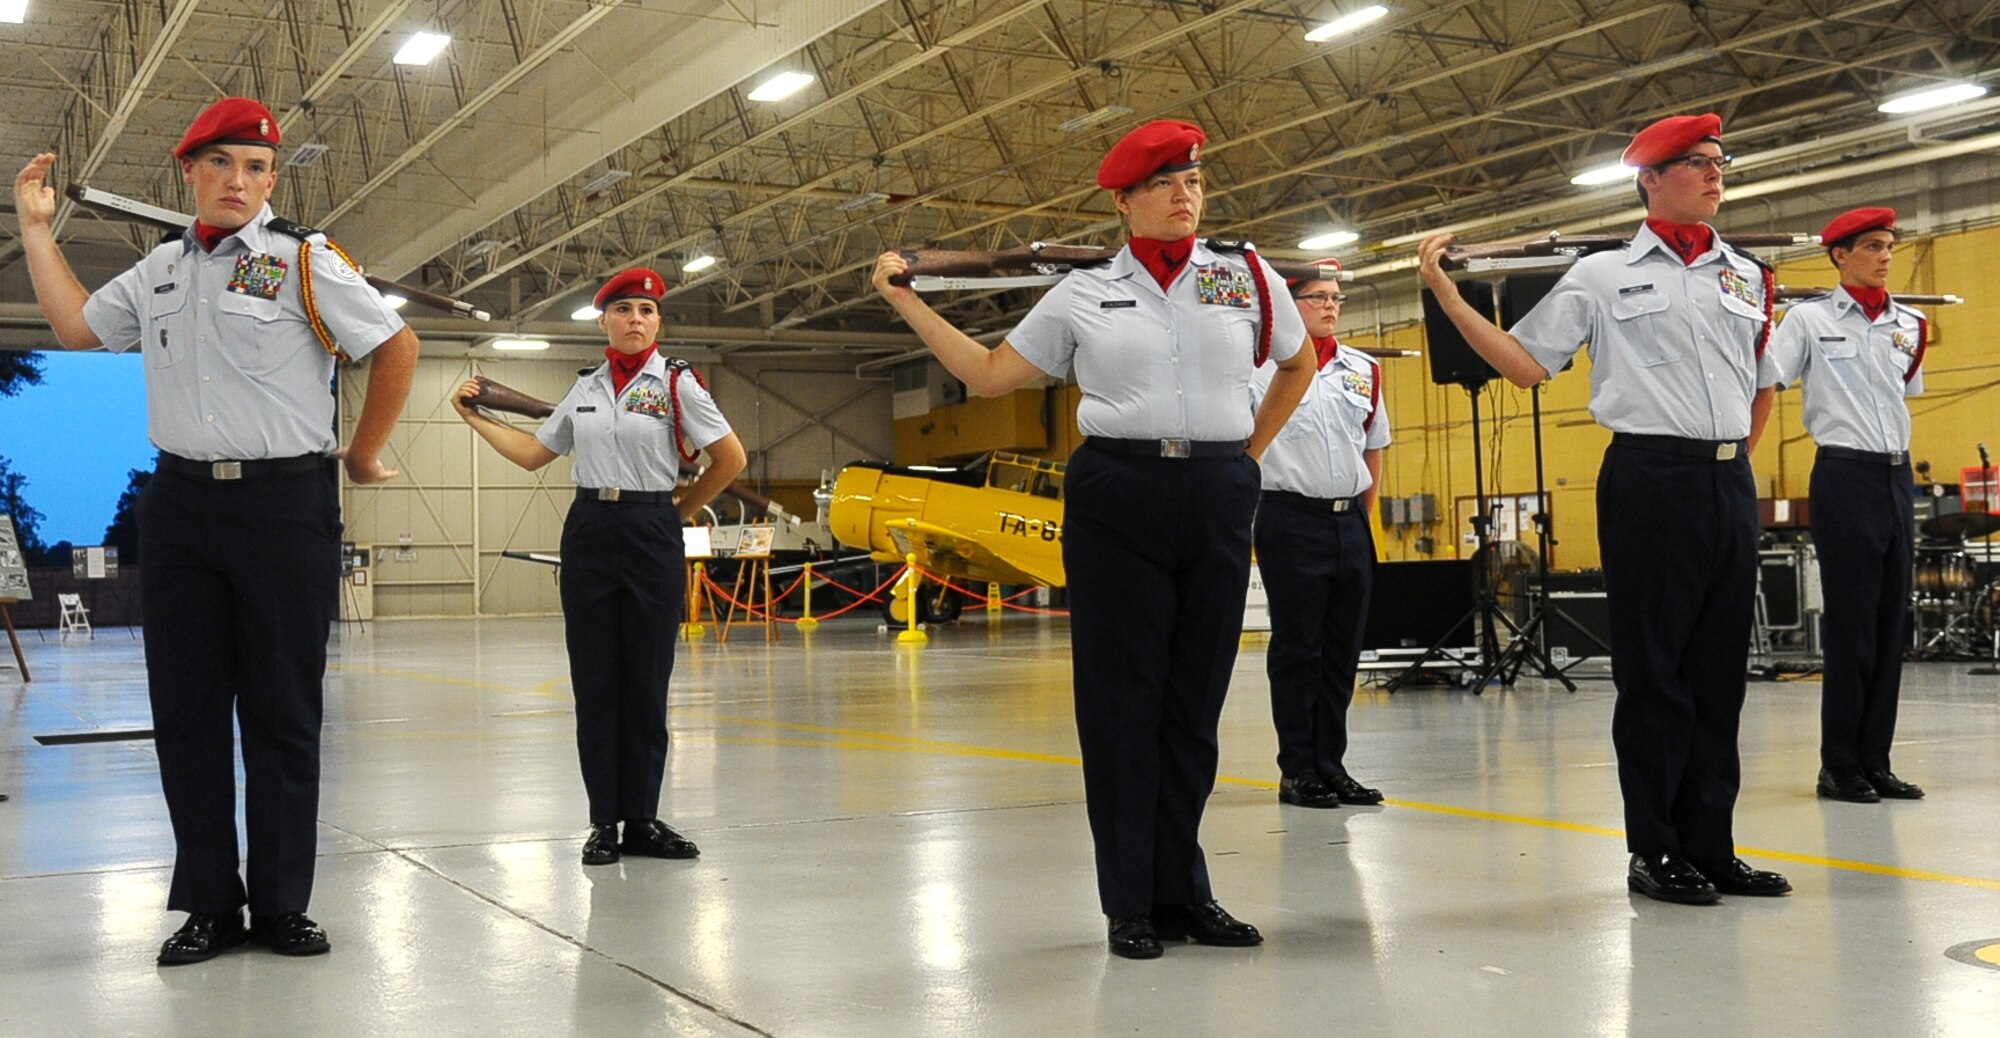 A Junior ROTC Saber team performs during the Air Force Ball Sept. 5 at the Mallory Hangar on Columbus Air Force Base. The cadets spun rifles while marching and saluting during their performance. (U.S. Air Force photo/Airman Daniel Lile)